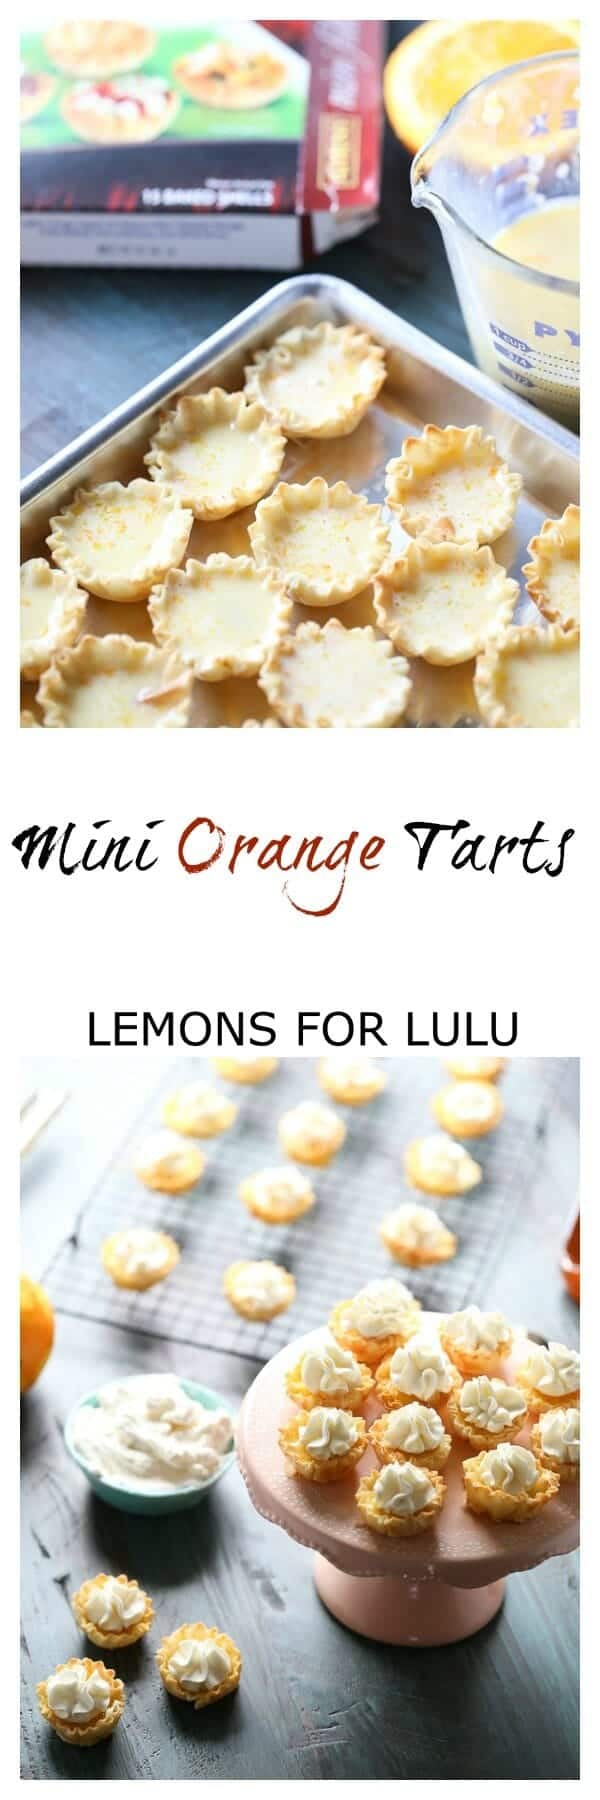 Mini orange tarts in a simple fillo cup topped with honeyed whipped cream. lemonsforlulu.com